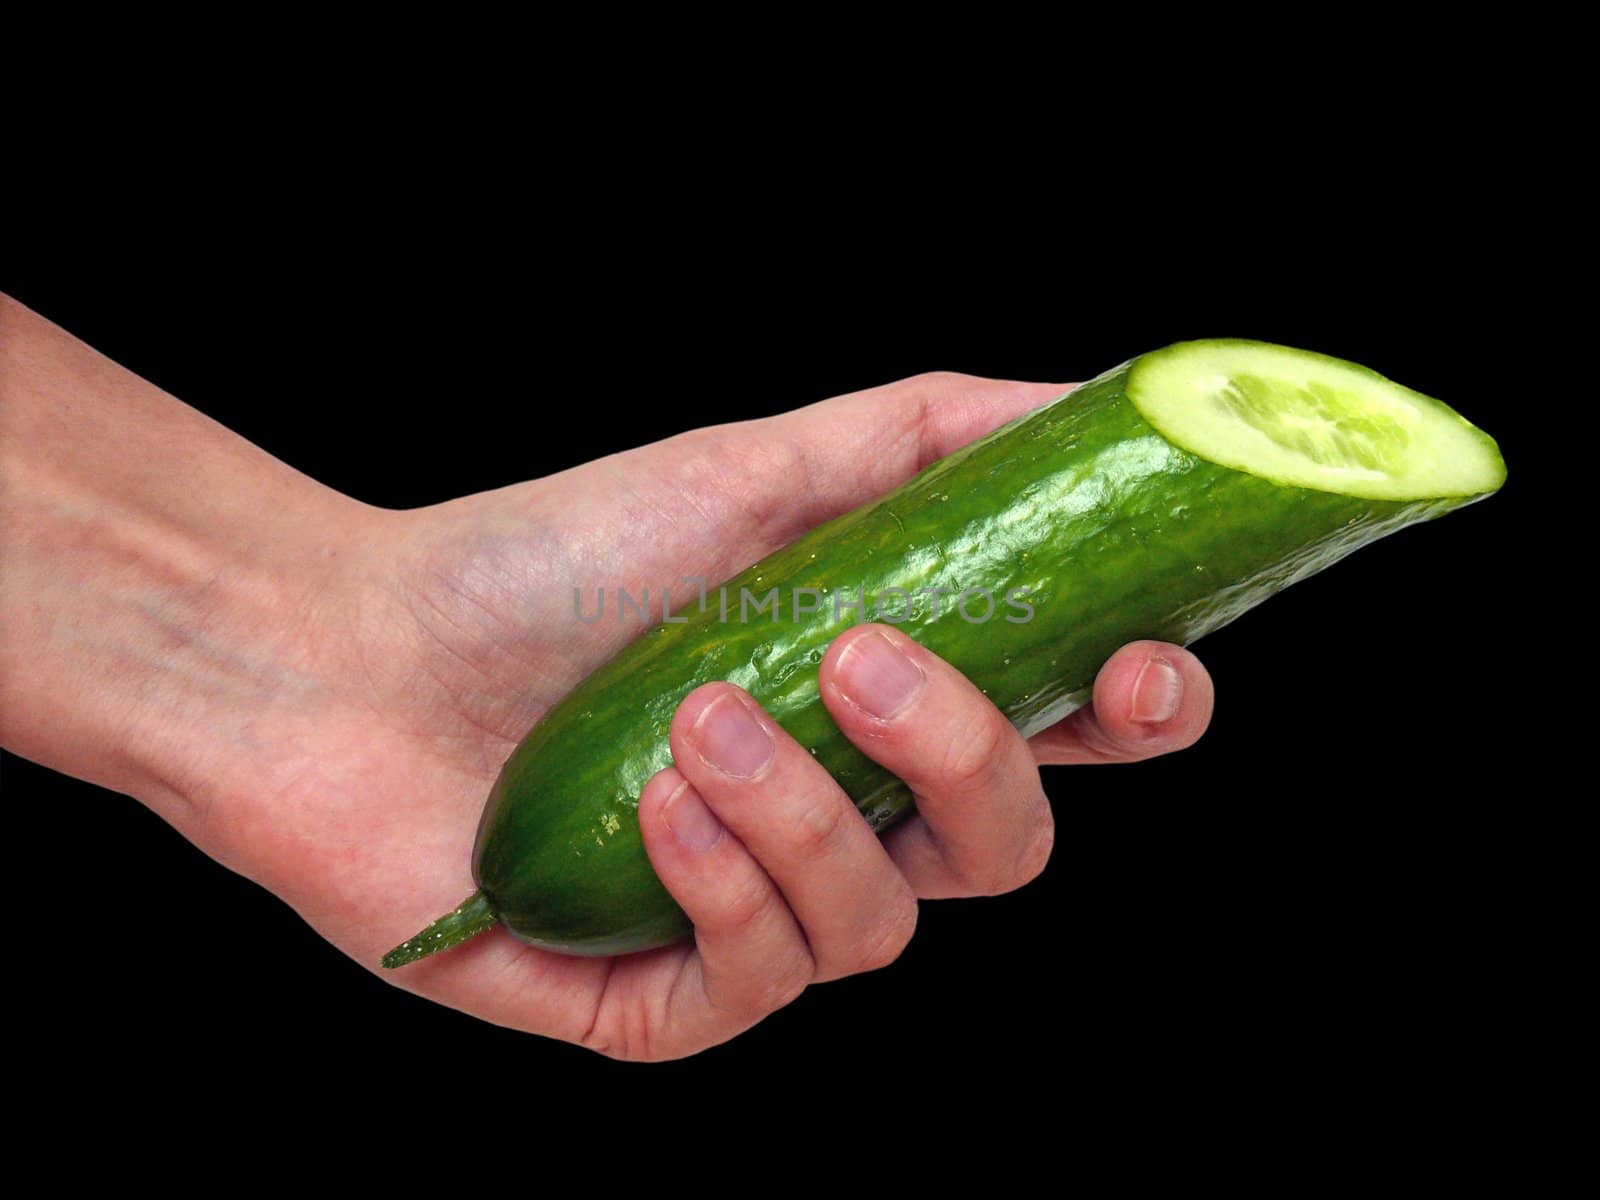 Hand holding a cucumber on black background